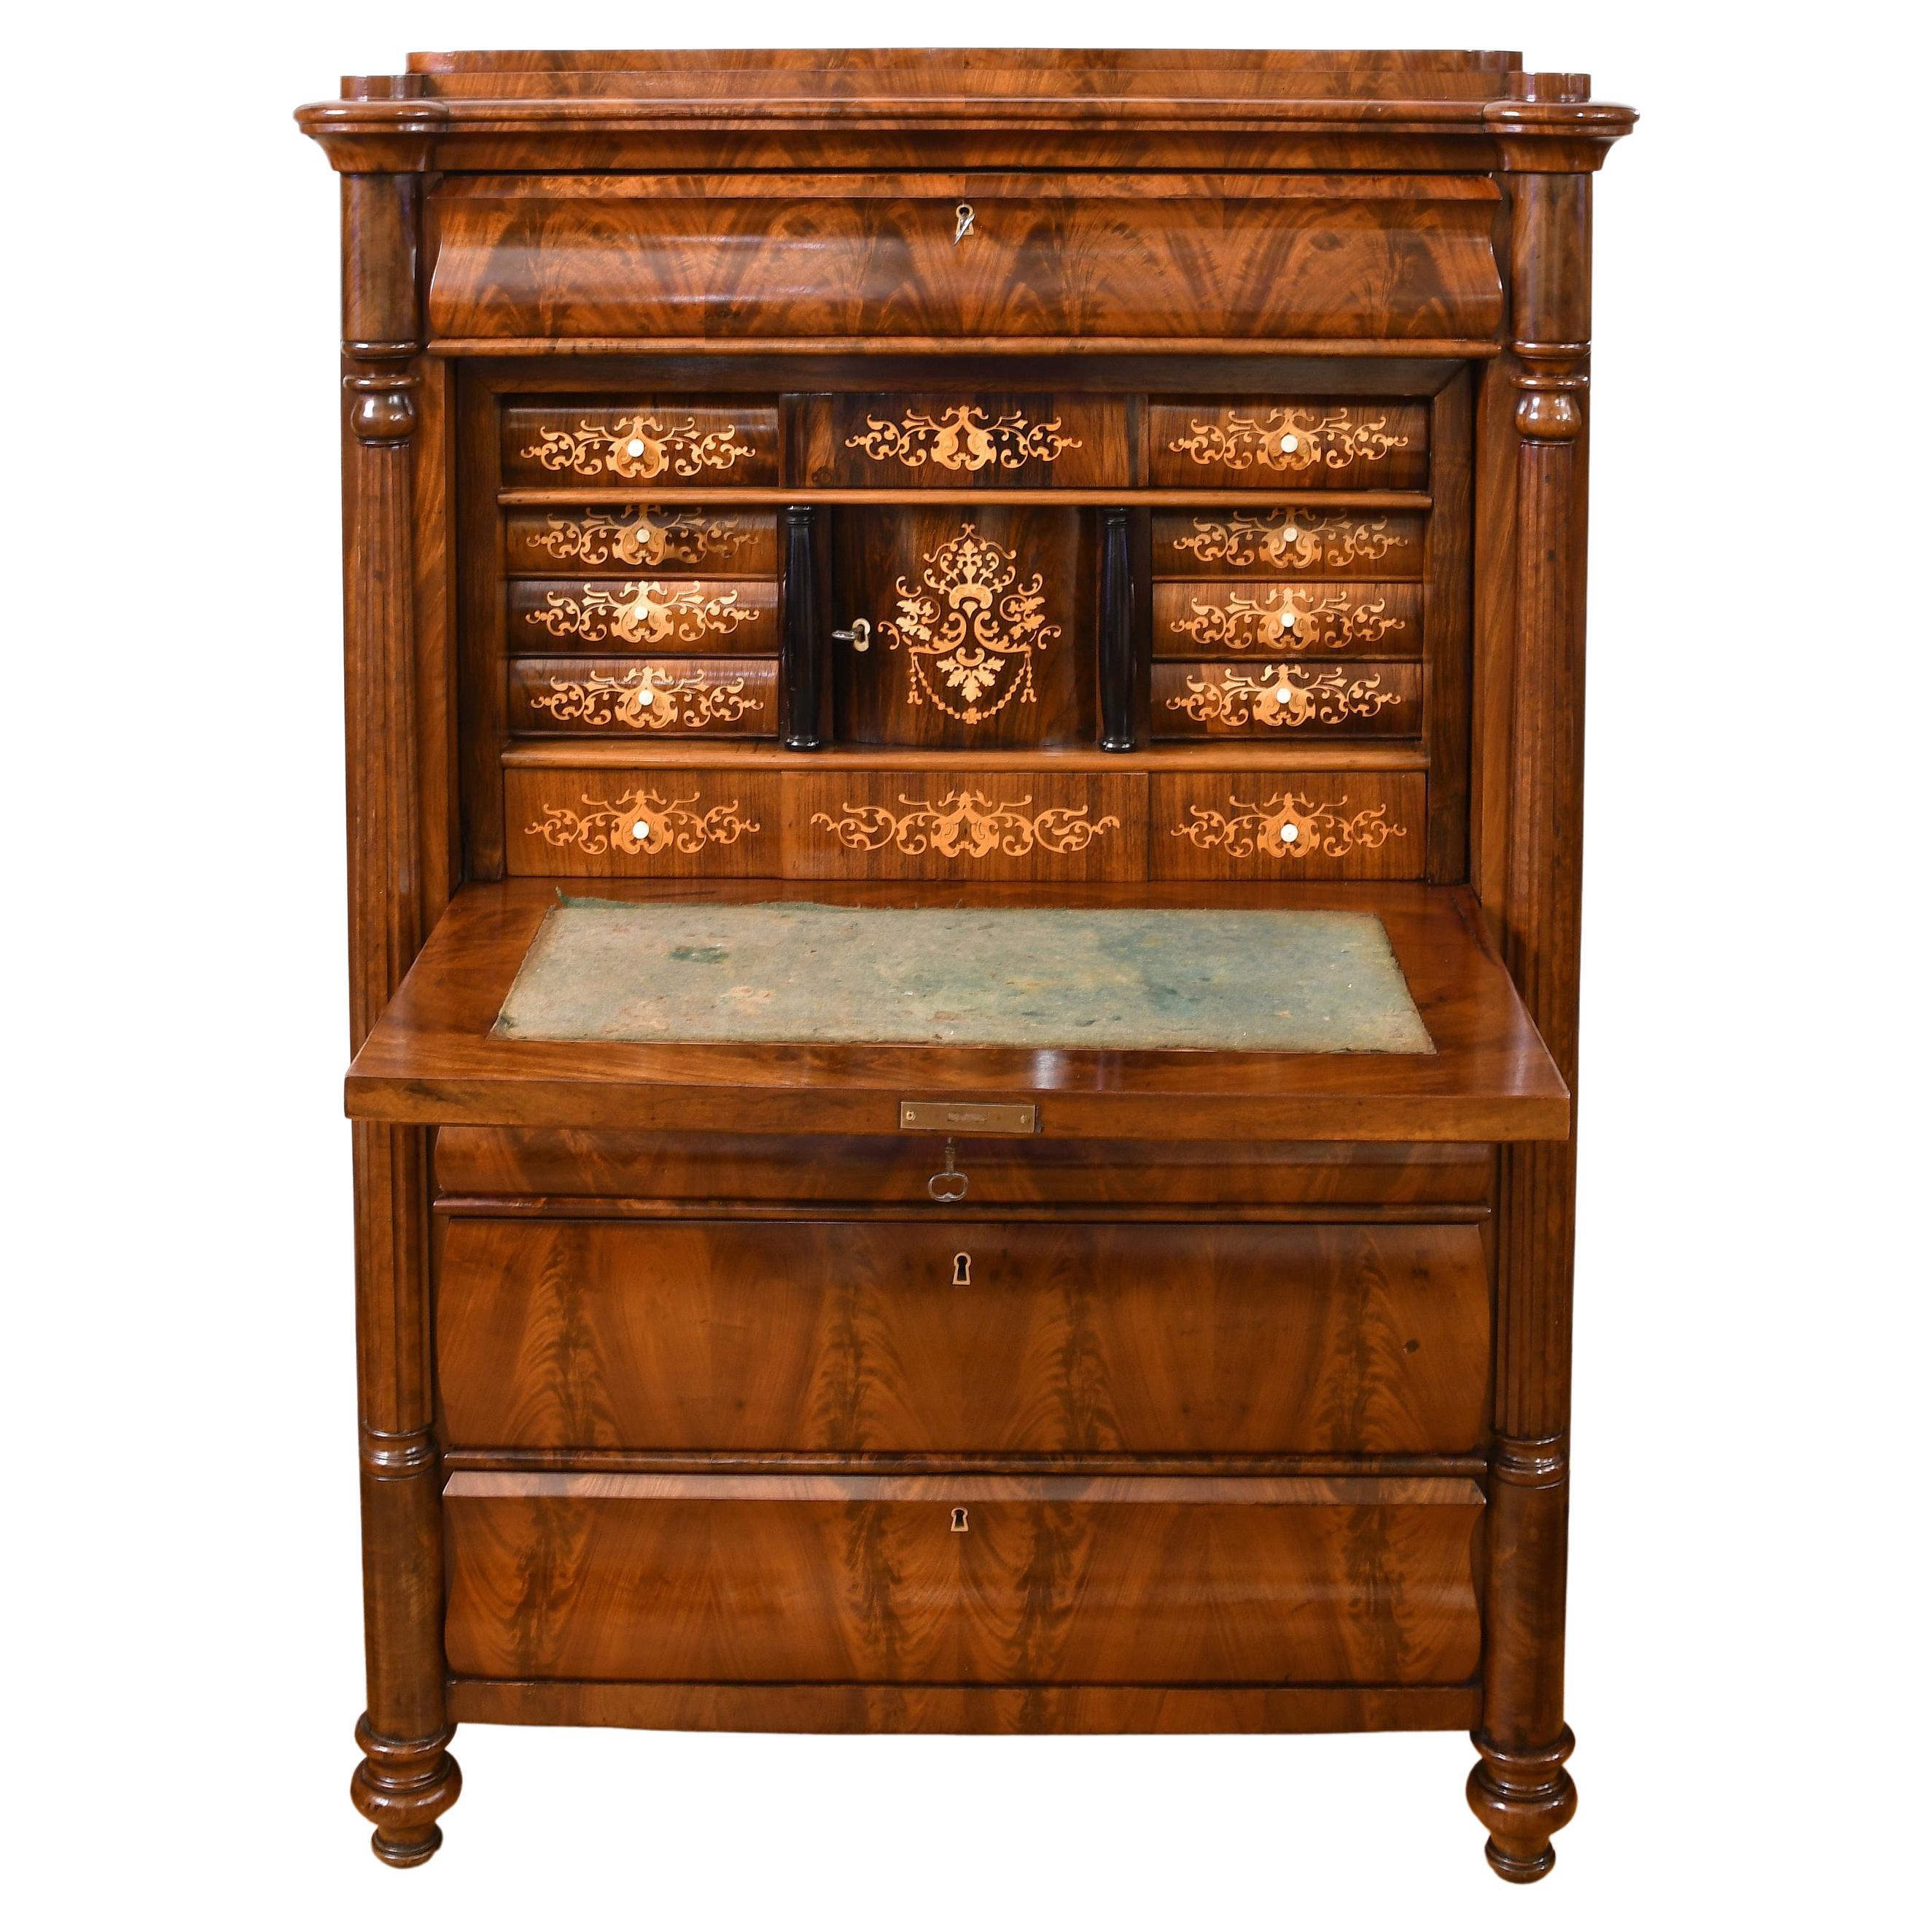 A very handsome Danish Christian VIII secretary in fine West Indies (also known as Cuban) mahogany with a stepped pedestal top over a single drawer above a fall-front desk, and followed by three storage drawers of graduated depths. Desk interior is